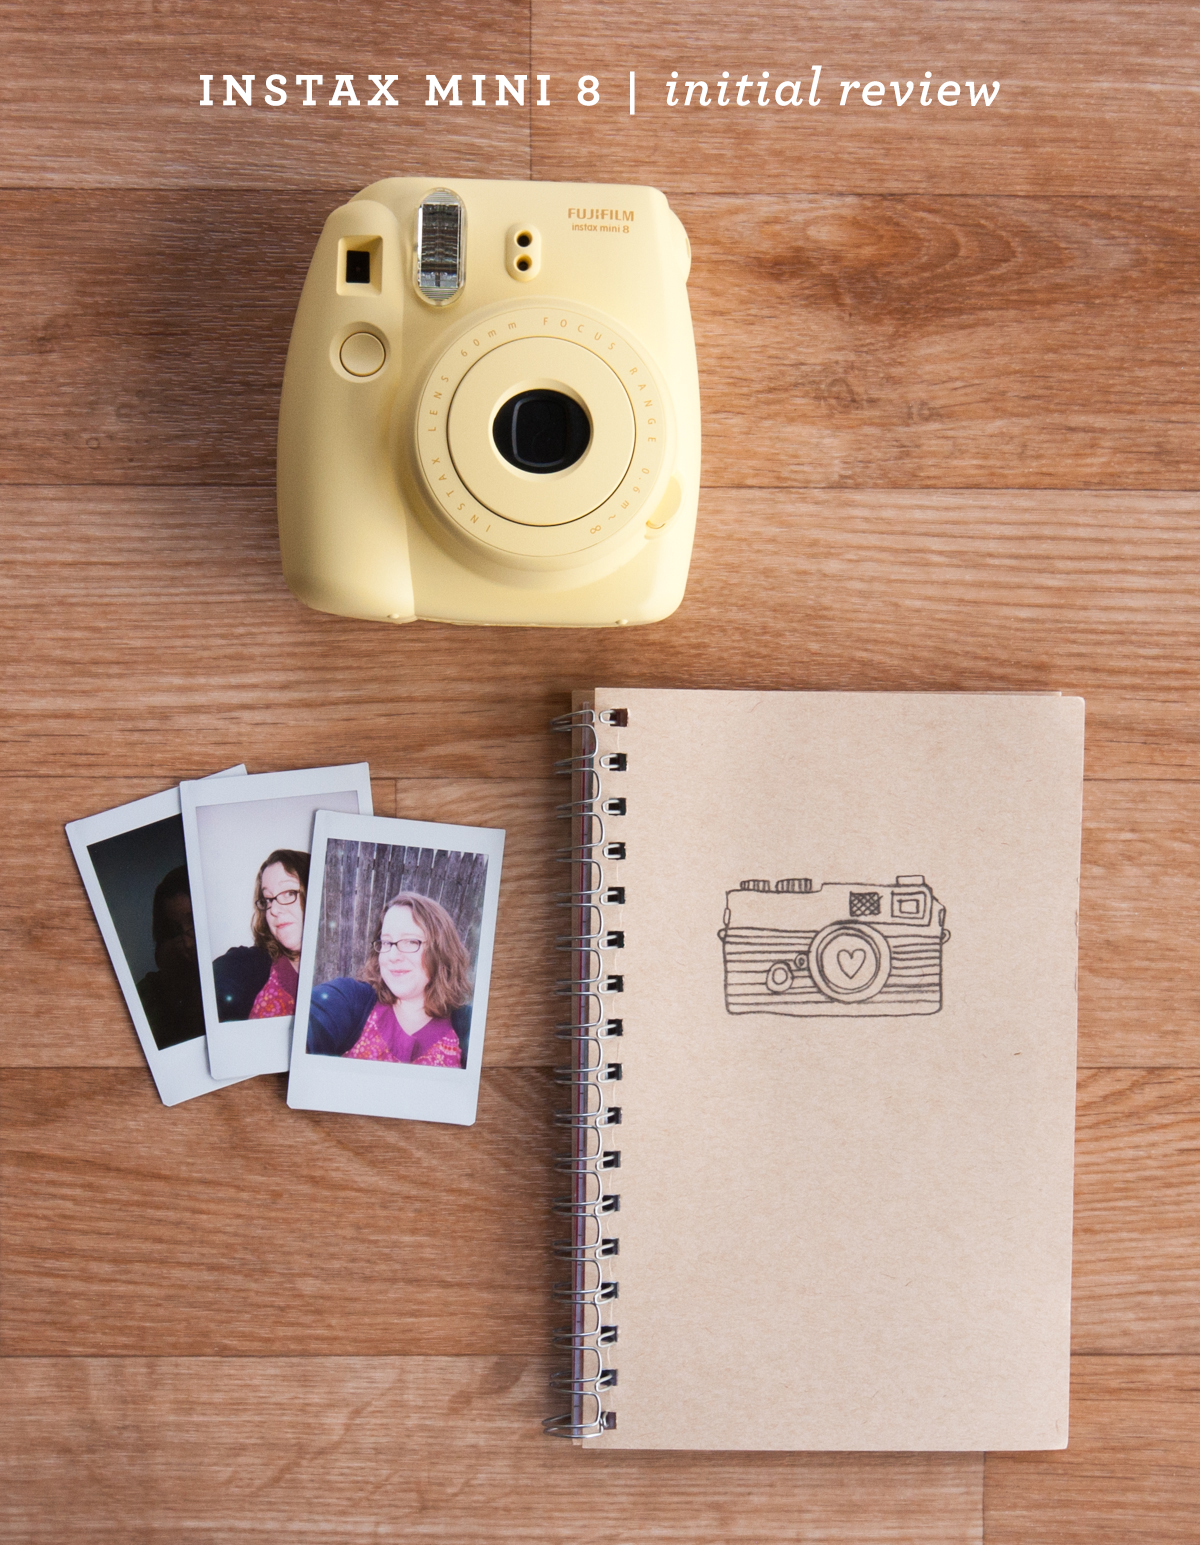 Fujifilm Instax Pal is an adorable tiny camera for cute photos